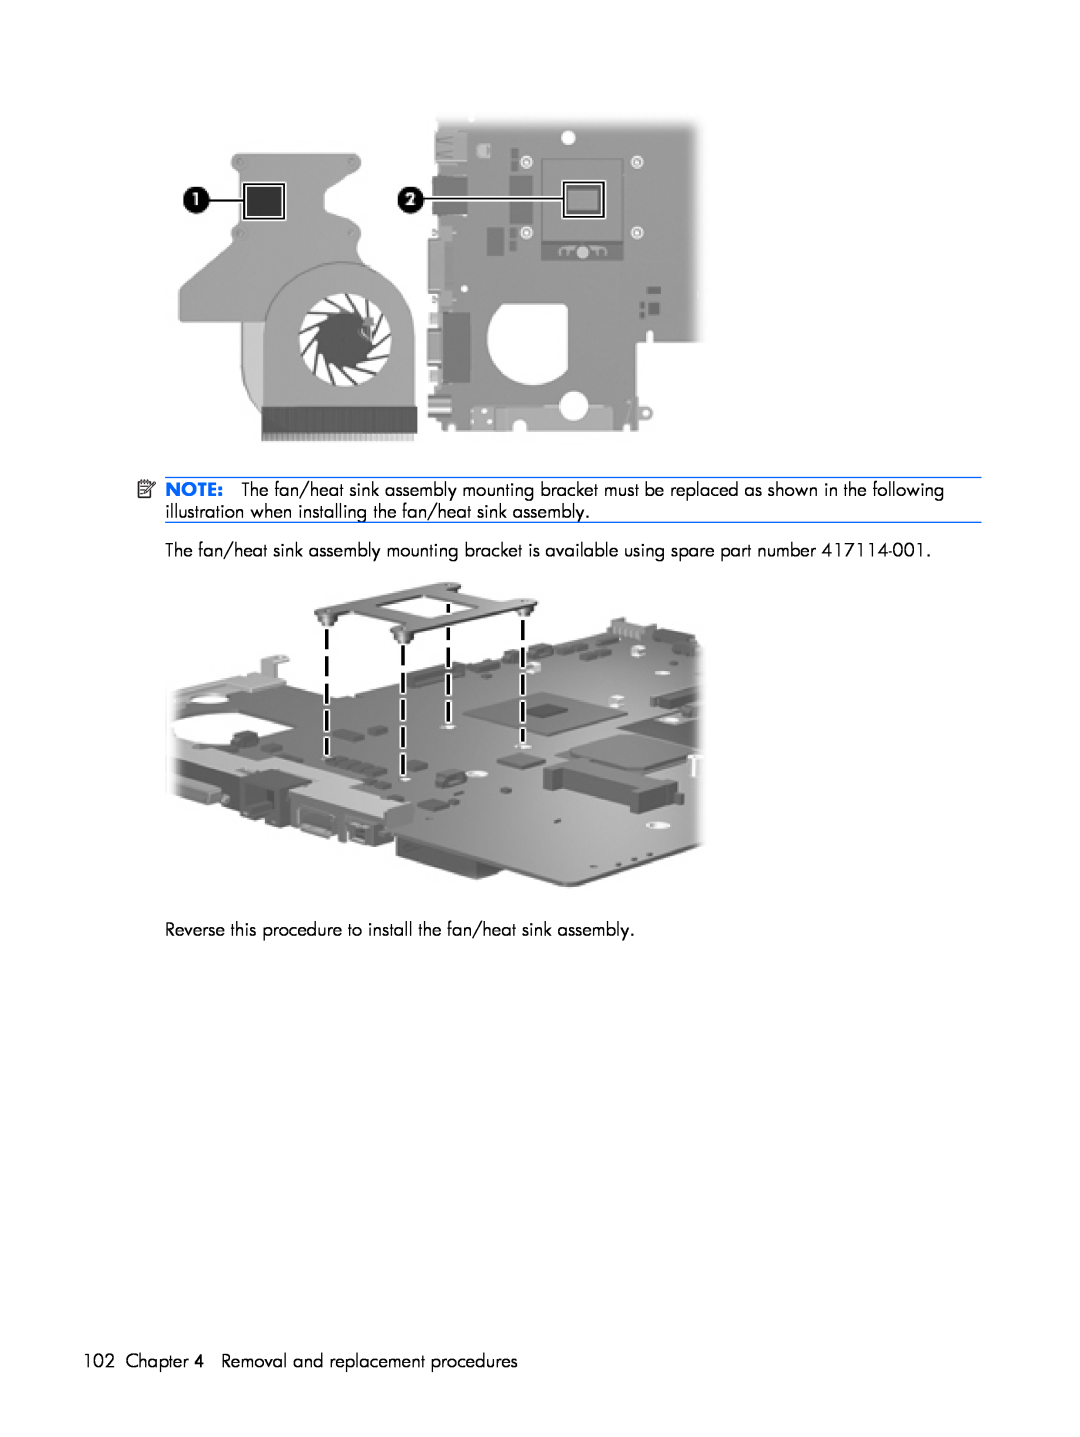 HP V3676TU, V3523TU, V3700 Reverse this procedure to install the fan/heat sink assembly, Removal and replacement procedures 